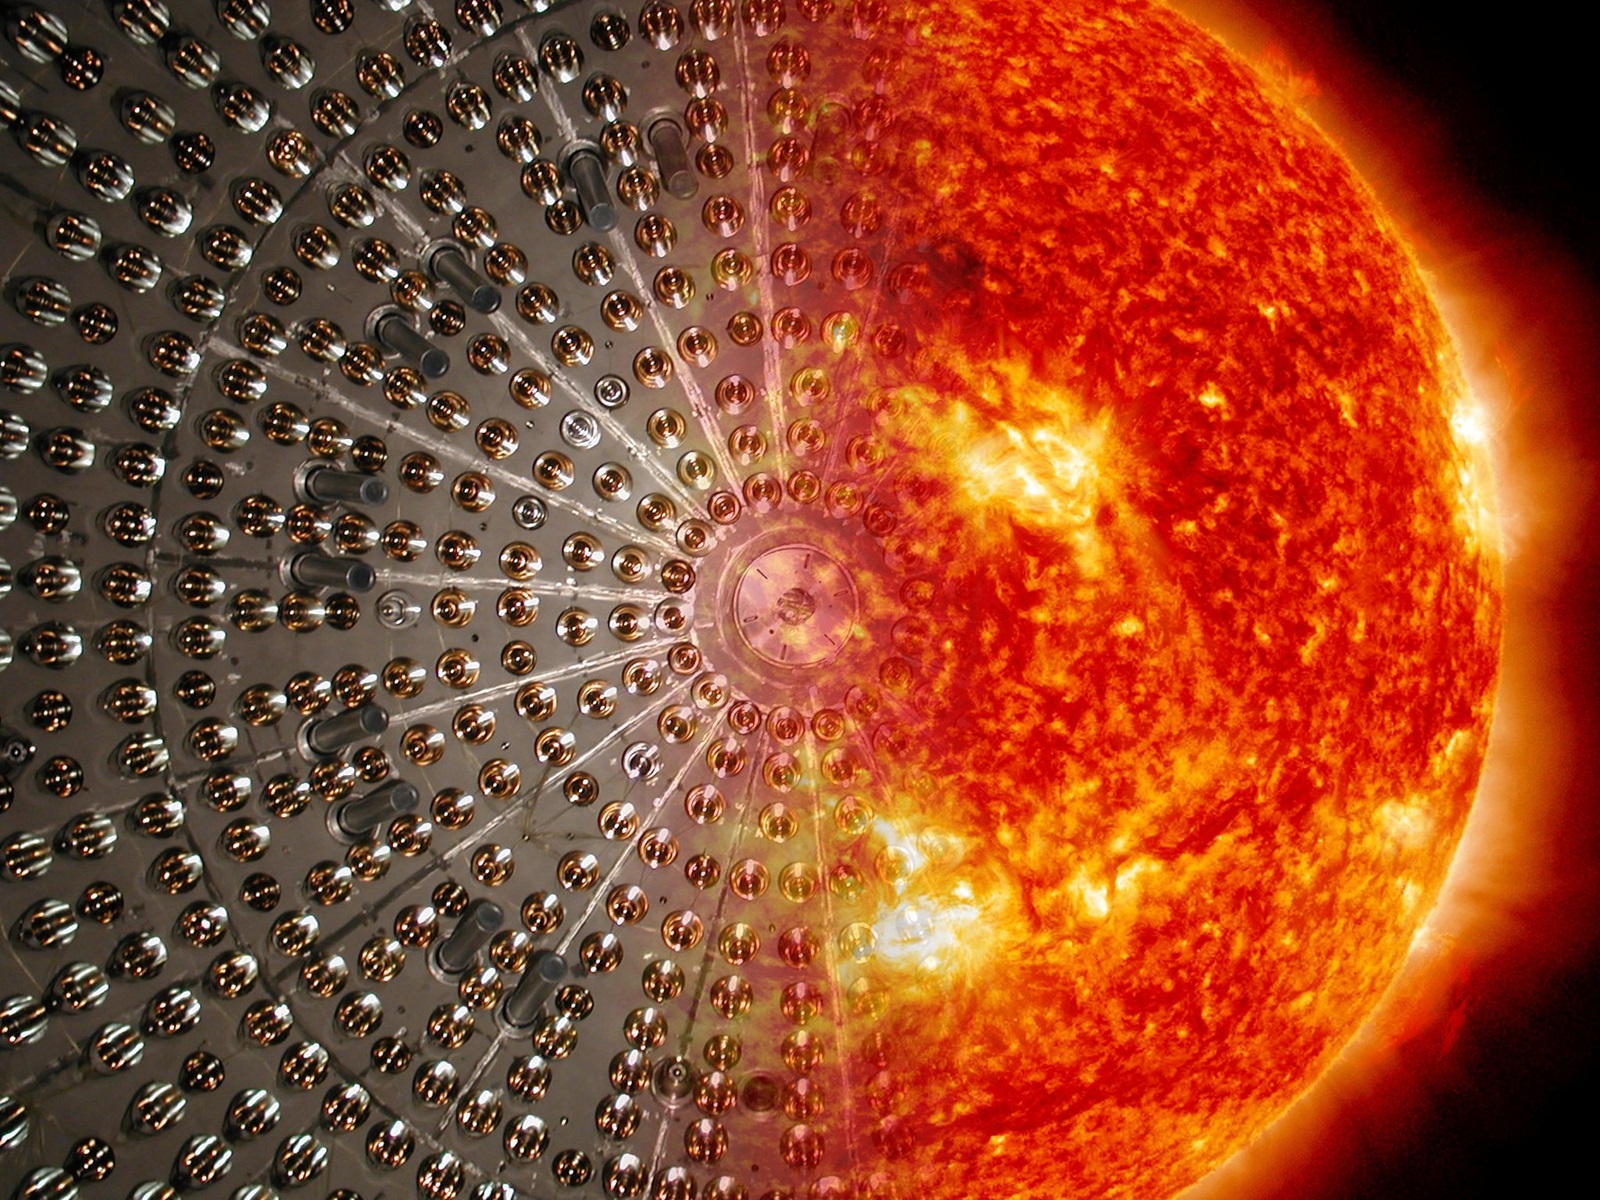 ***EMBARGOED UNTIL 16.00 BST, WED NOV 25 (11.00 ET)***

Artistic rendering of the Borexino stainless steel sphere merged with the image of the Sun. See SWNS story SWNNsun. The secret of the sun's nuclear fusion has been discovered by scientists. Rare, ghostly particles produced inside it have been captured for the first time. They travelled more than 90 million miles -  to a detector buried deep beneath a mountain in Italy. The breakthrough sheds fresh light on the reactions fuelling our home star. They produce less than one percent of the sun's energy.,Image: 571280227, License: Rights-managed, Restrictions: This image hereby disclosed to your organisation is so disclosed on the condition that your organisation will take all steps necessary to ensure that any identifiable personal data is processed in full compliance with the Data Protection Act 2018

follow us on twitter - @swns
browse our website - swns.com
email pix@swns.com, Model Release: no, Credit line: Maxim Gromov / Borexino Collaboration / / SWNS / Profimedia